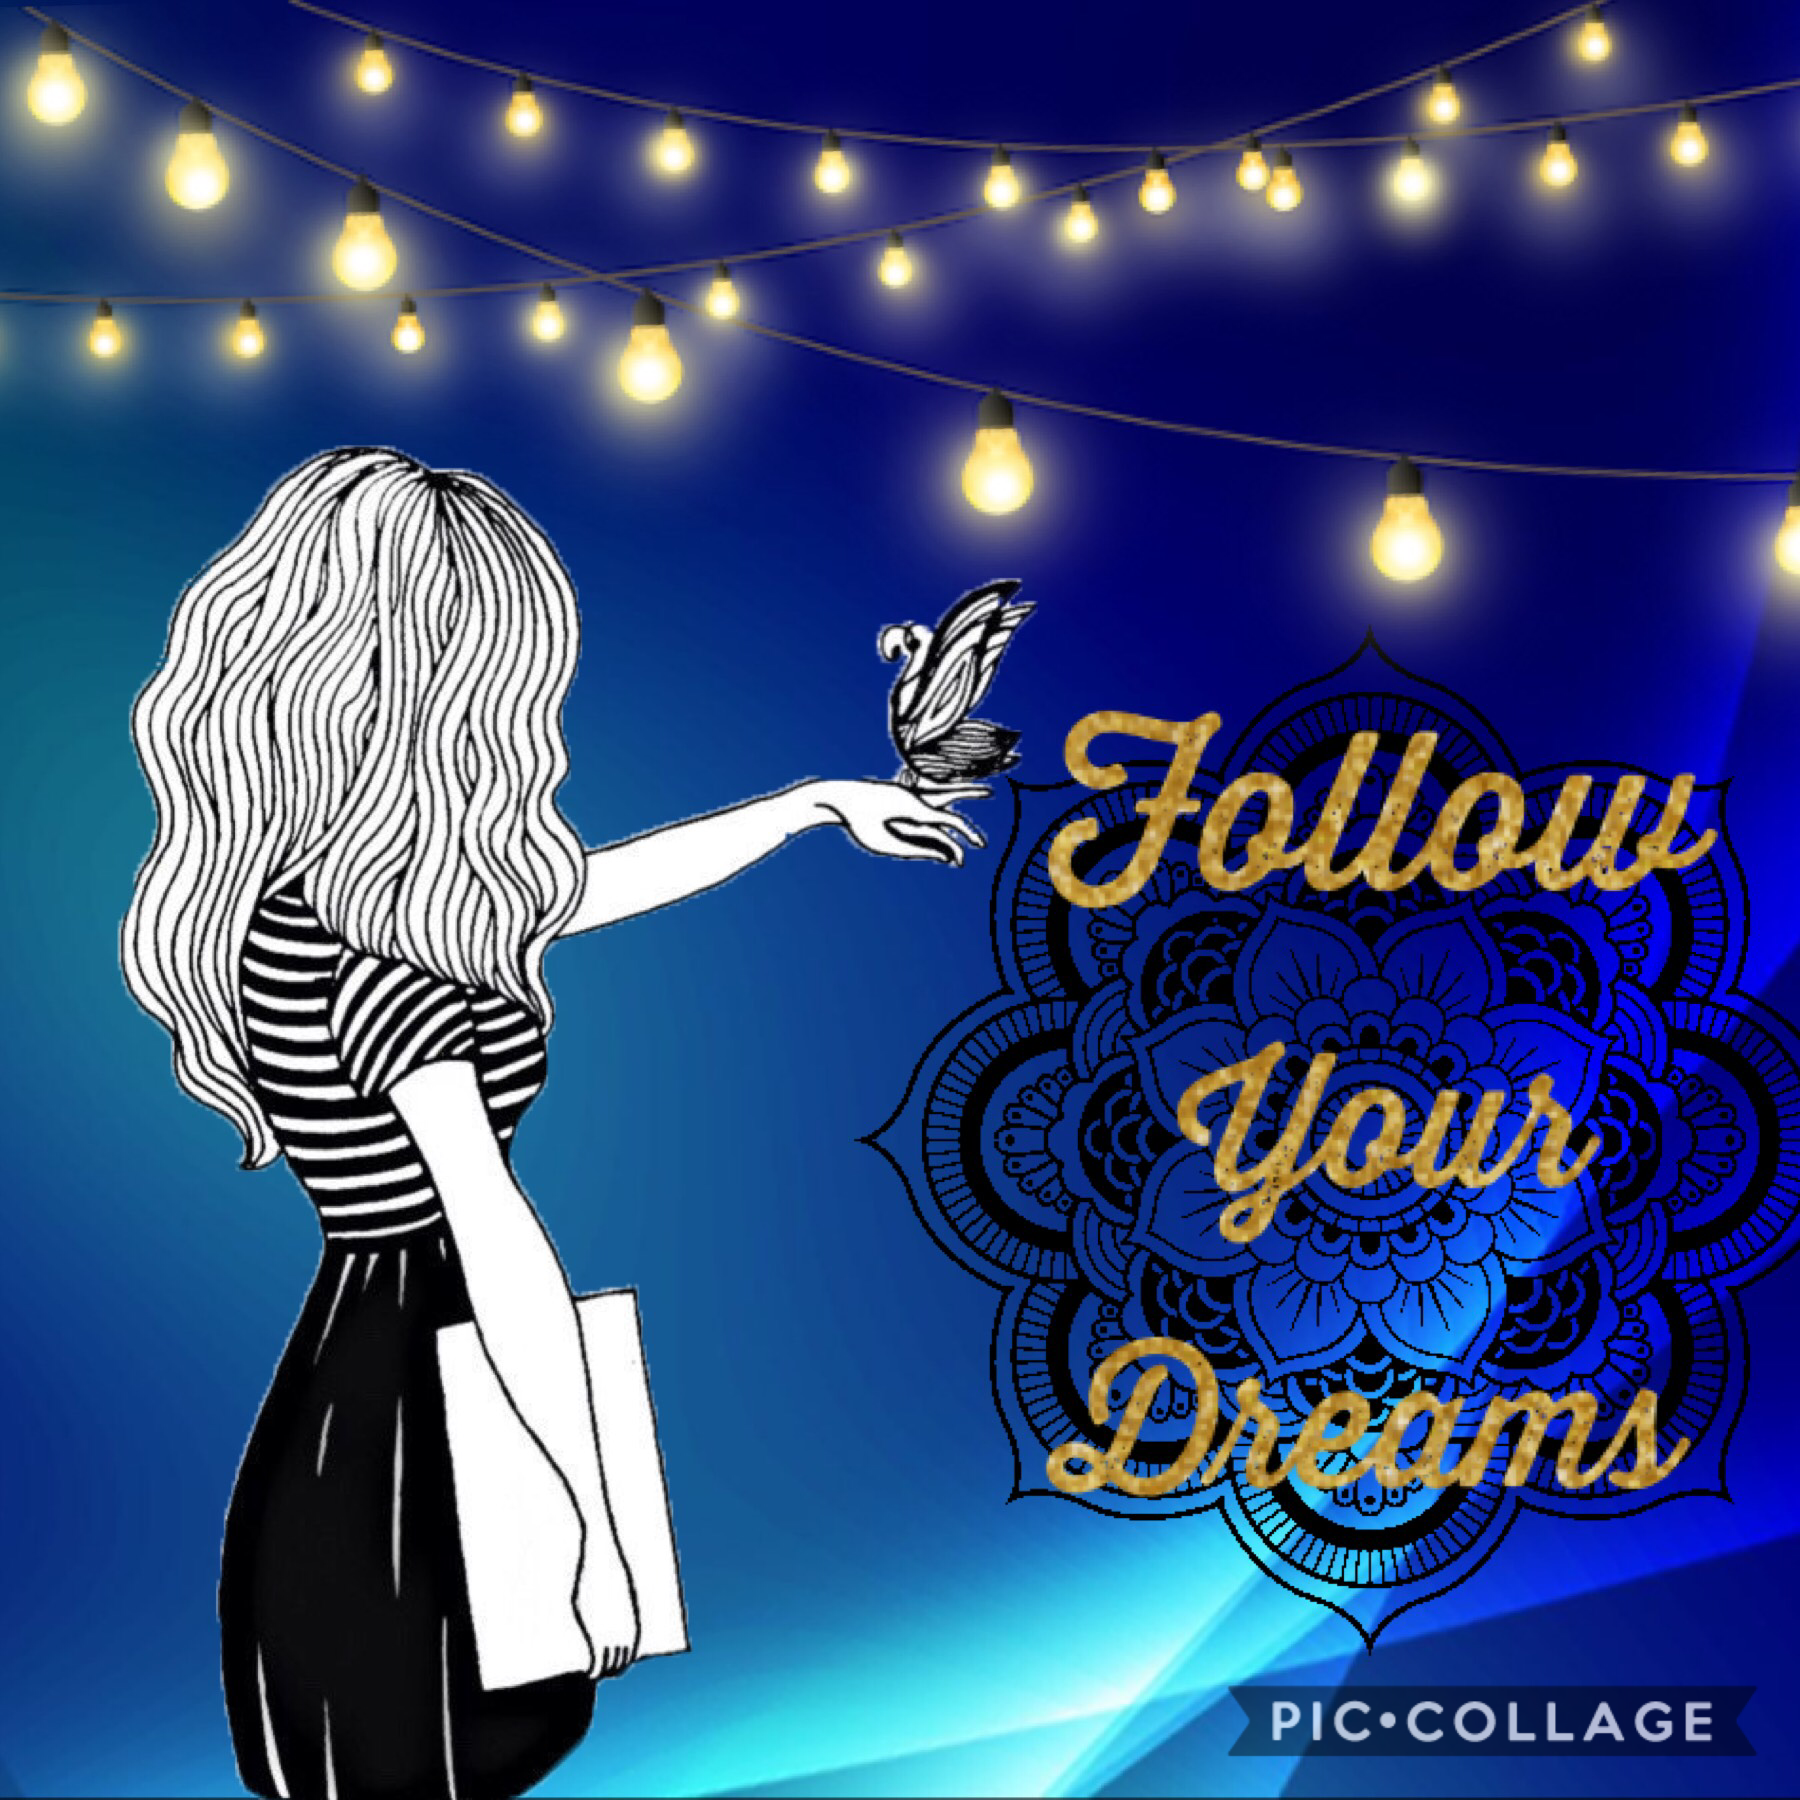 Follow Your Dreams don’t let others hold you back!